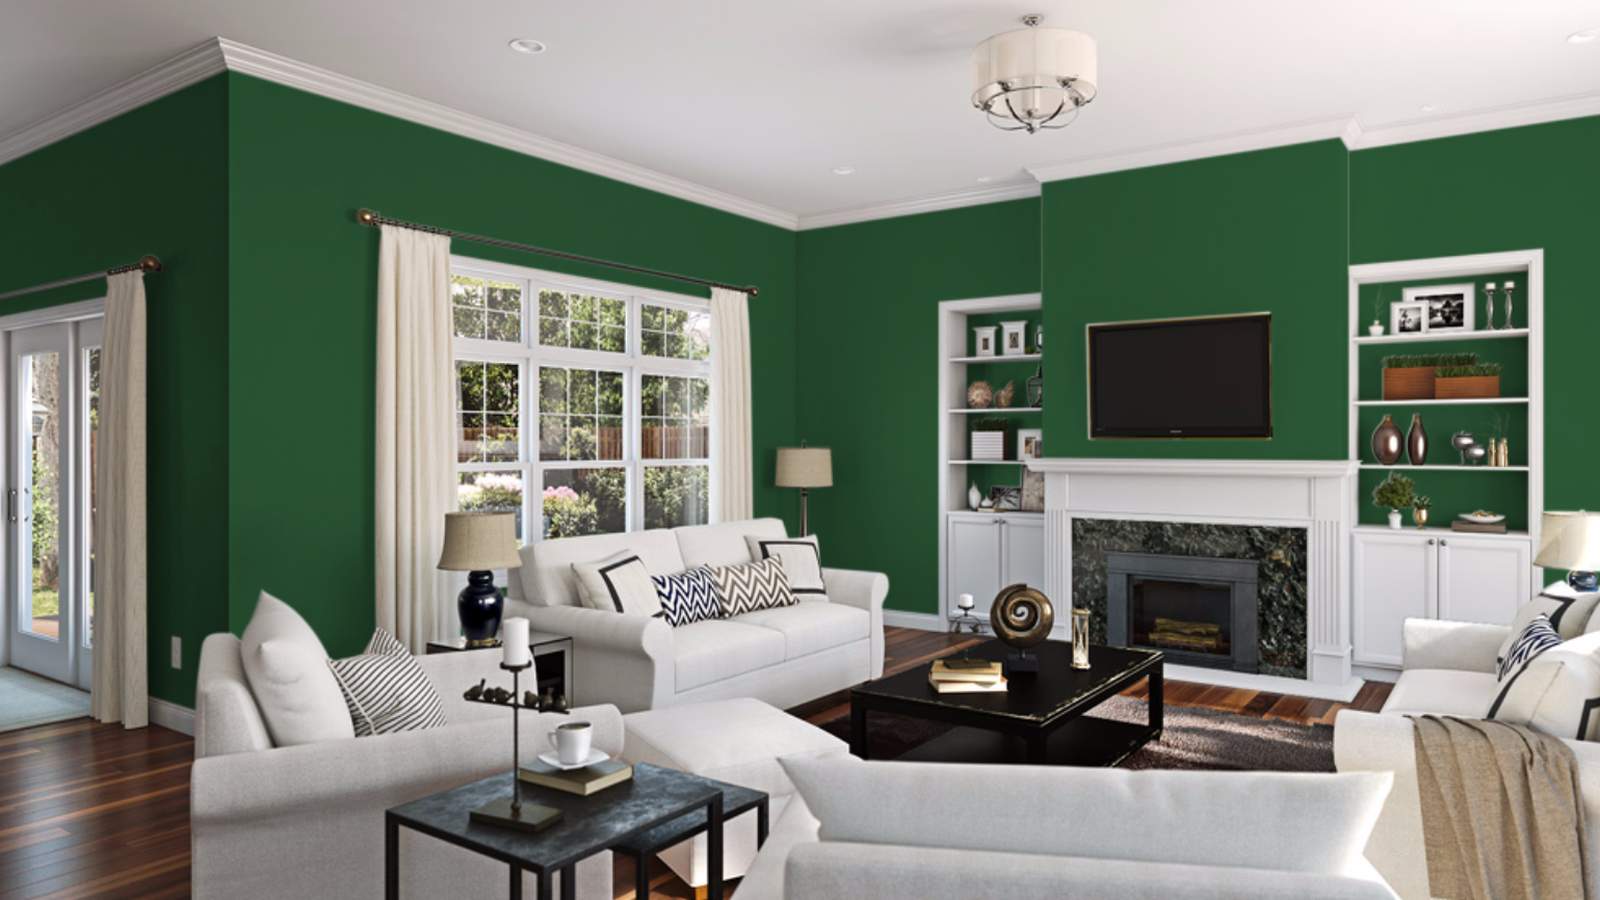 6 Bold, Unexpected Paint Colors for Every Room in Your Home